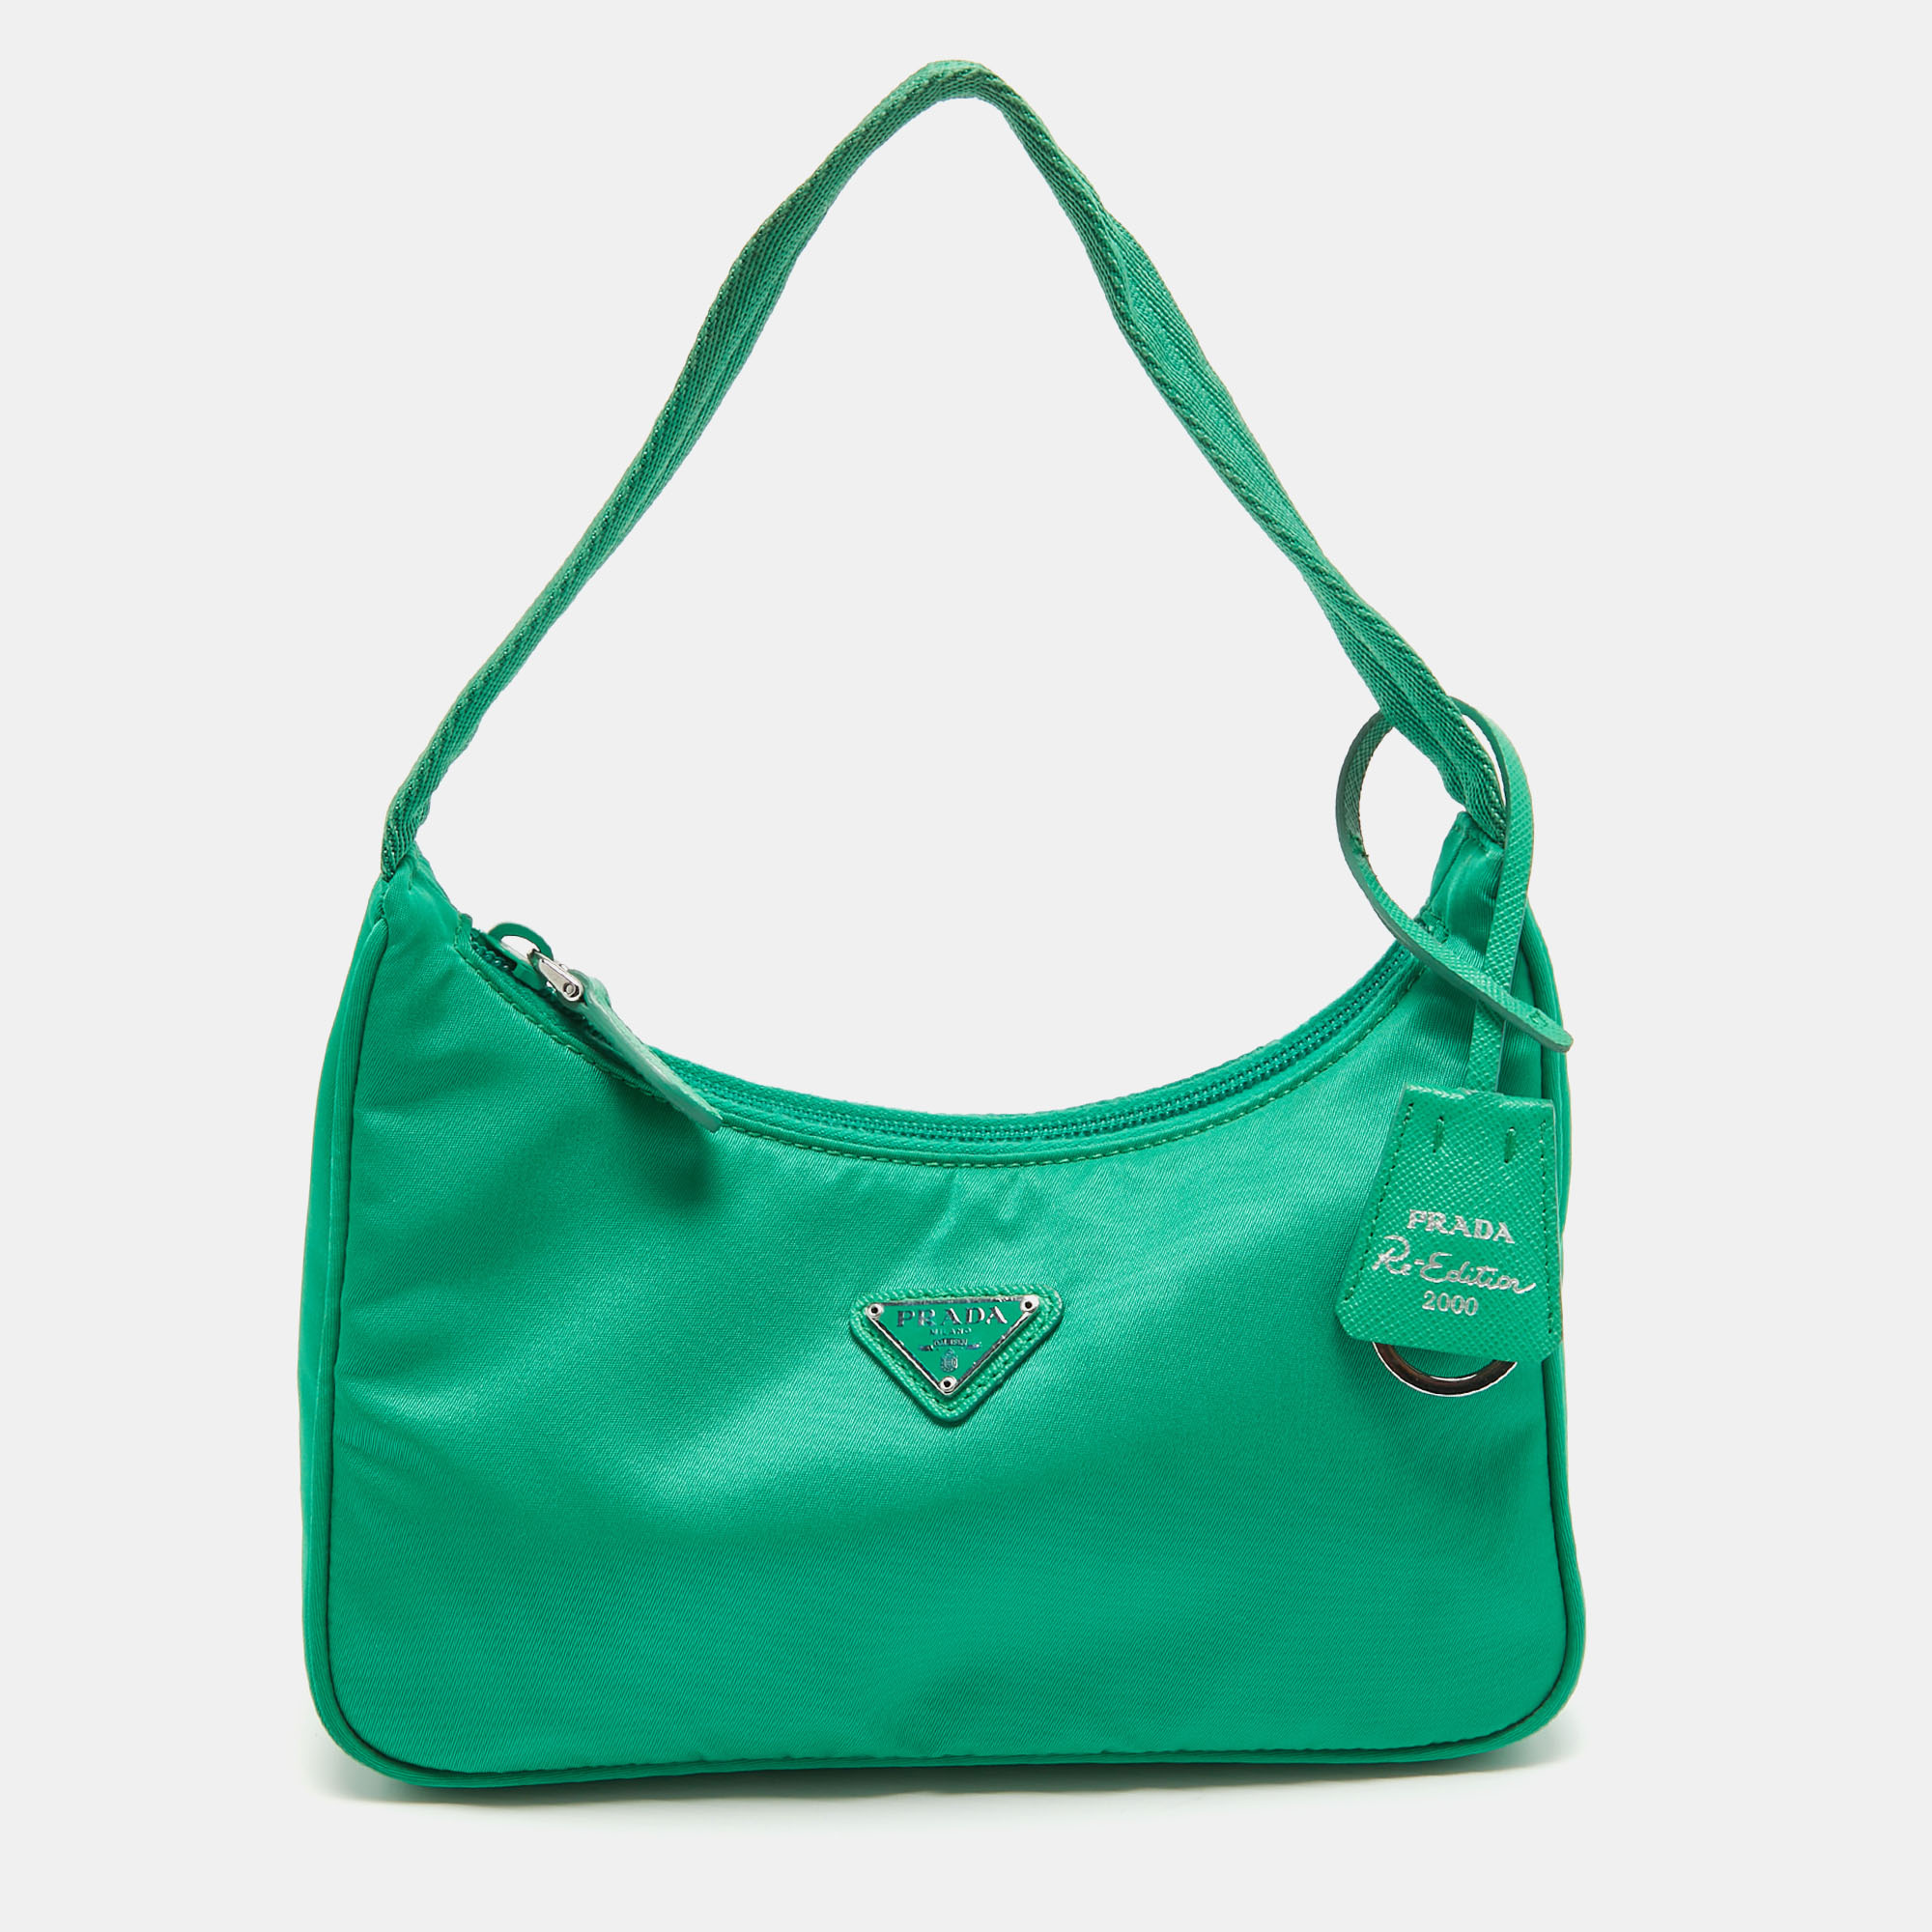 Ensure your days essentials are in order and your outfit is complete with this Prada green bag. Crafted using the best materials the bag carries the maisons signature of artful craftsmanship and enduring appeal.